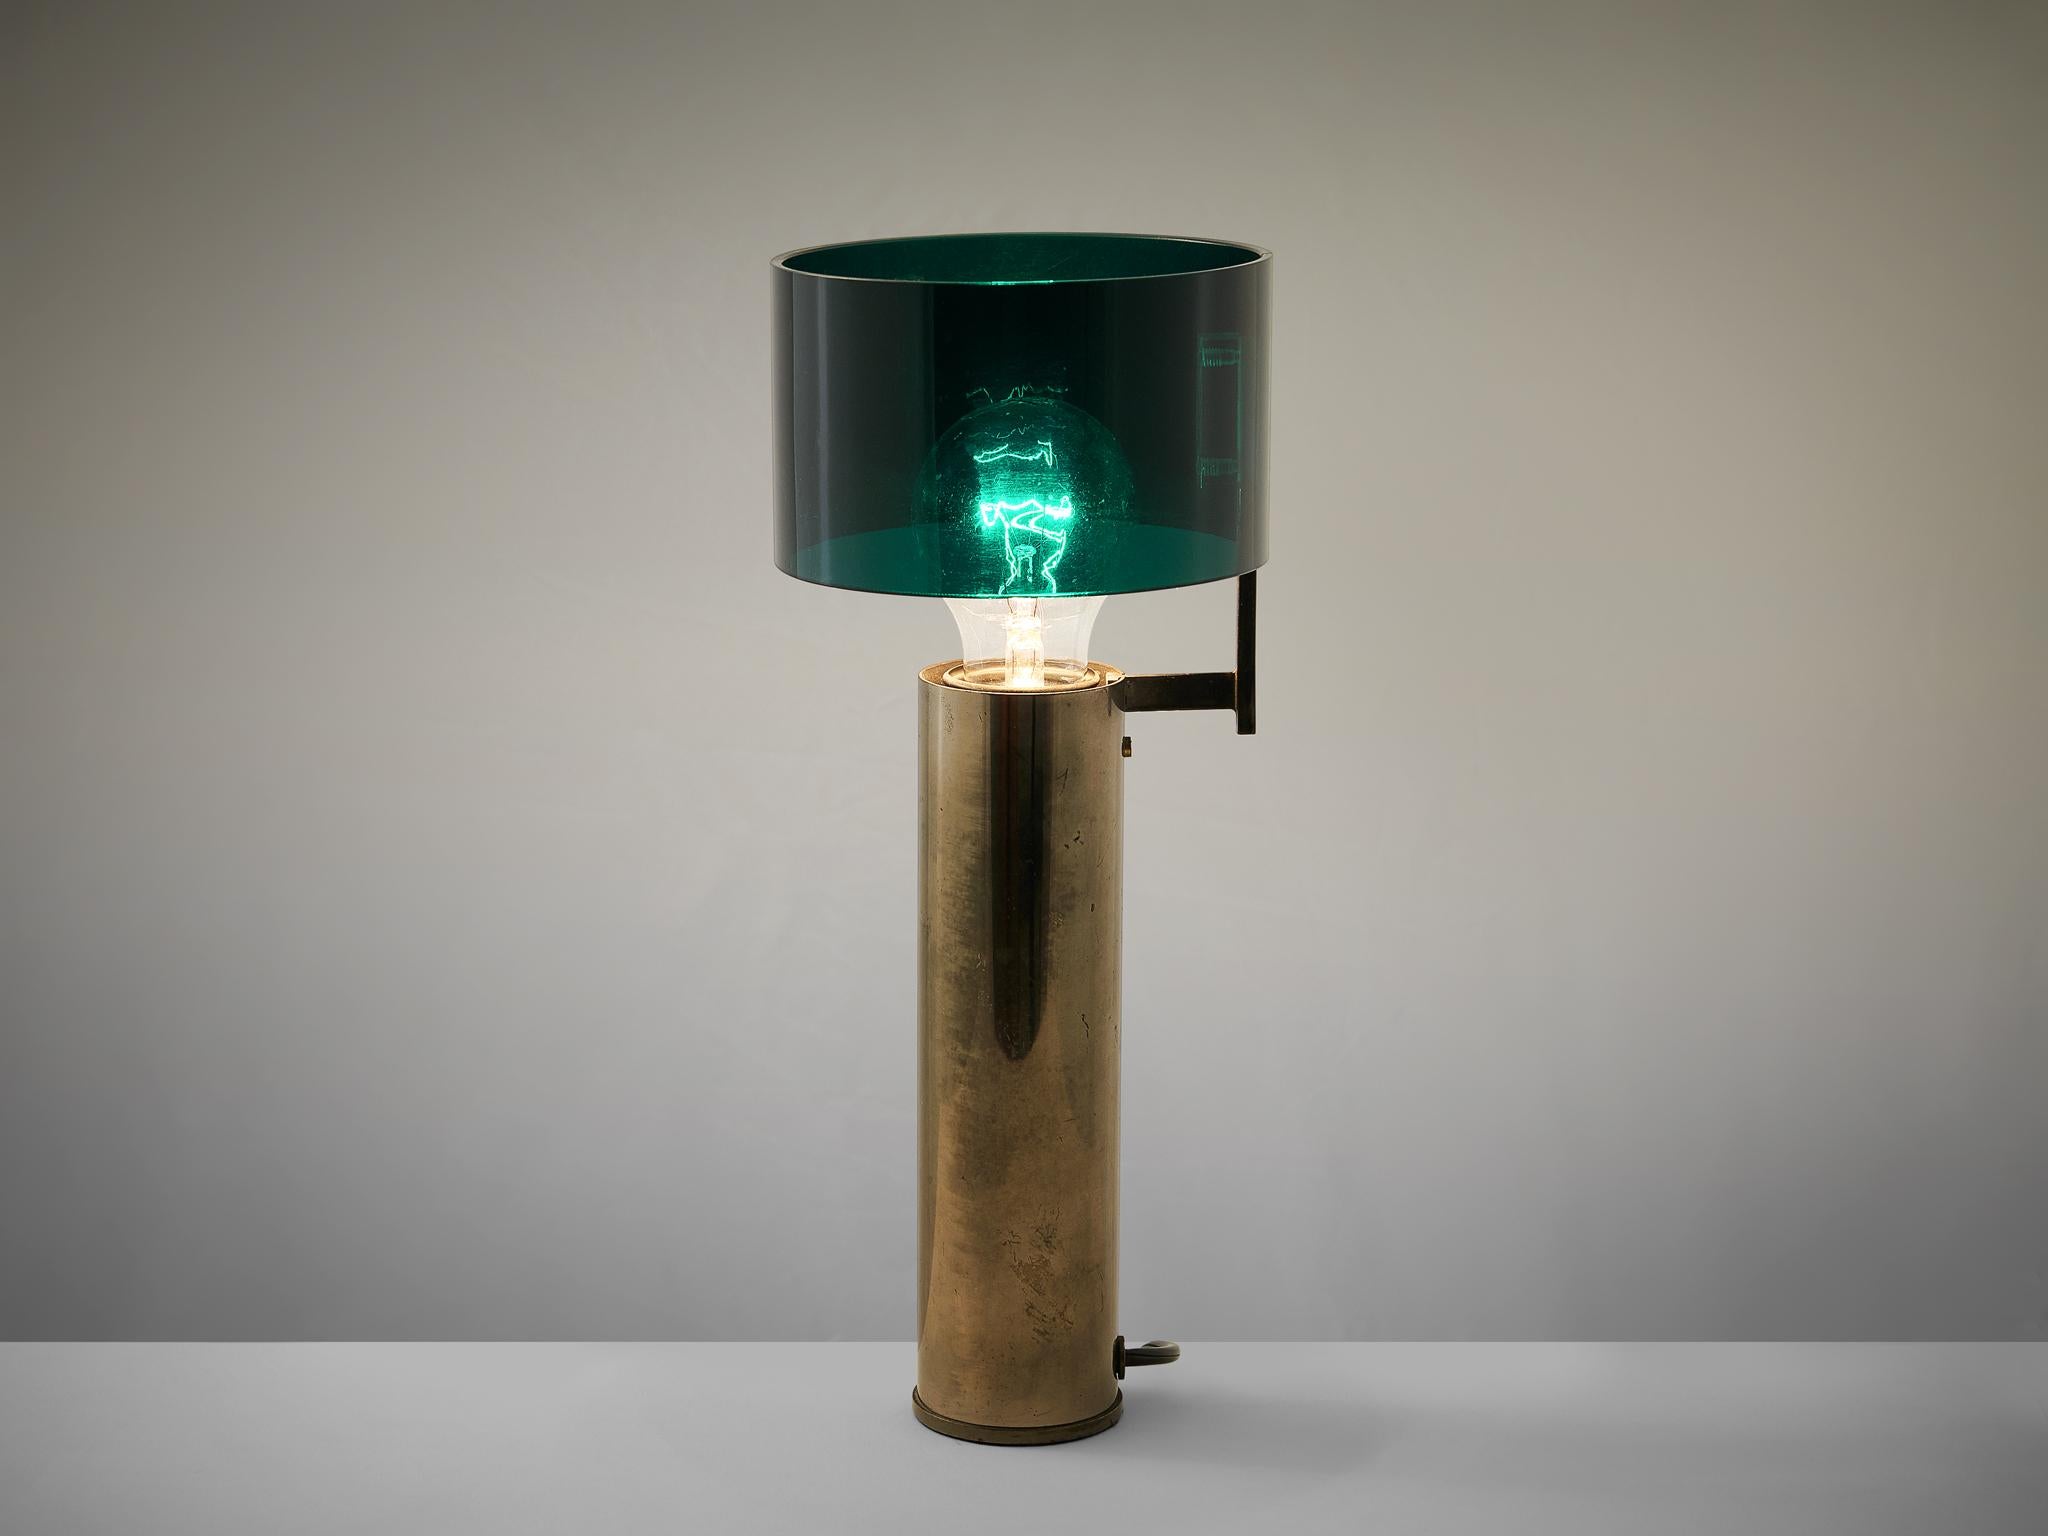 Tito Agnoli for O-luce, table lamp, model '269', nickel-plated brass, Perspex, Italy, 1959. 

Italian designer Tito Agnoli designed this table lamp, model 269, in 1959 for O-Luce. This table lamp features a nickel-plated cylindrical brass base. A